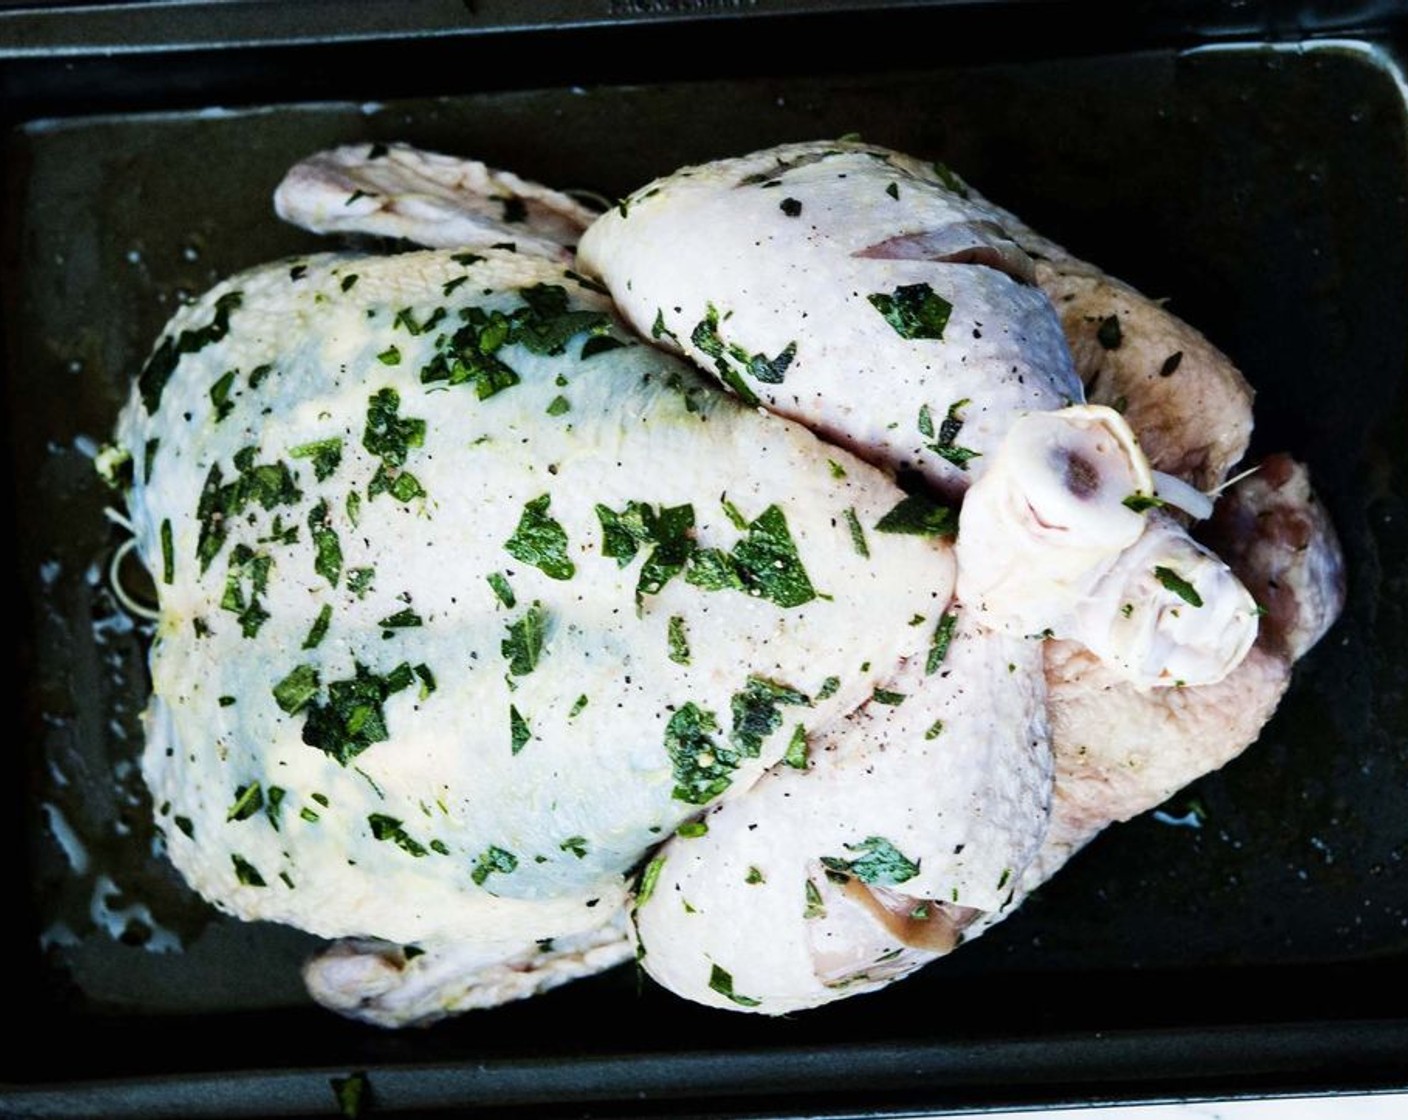 step 6 Slide most of the herbs under the skin of the chicken breast and then add 1/3 of the Butter (2 Tbsp) under the skin per side. Rub the remaining herbs and butter on the top and outside of the chicken.